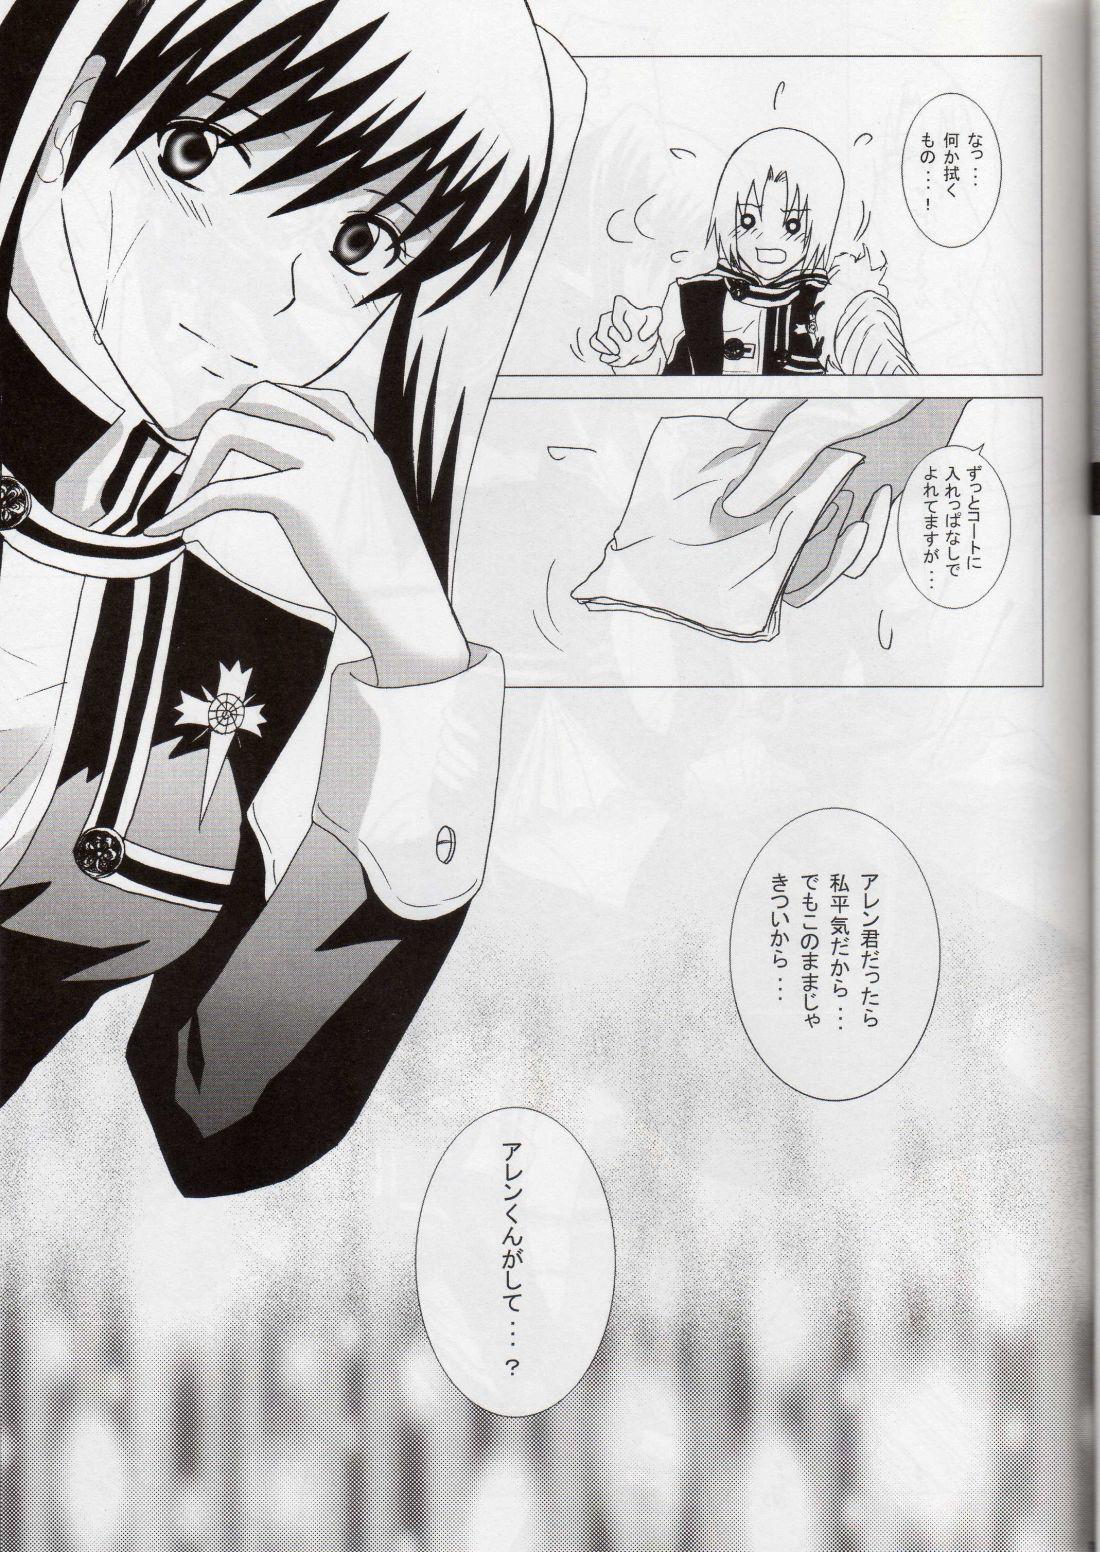 Sensual Star Shaft - D.gray man Interview - Page 10